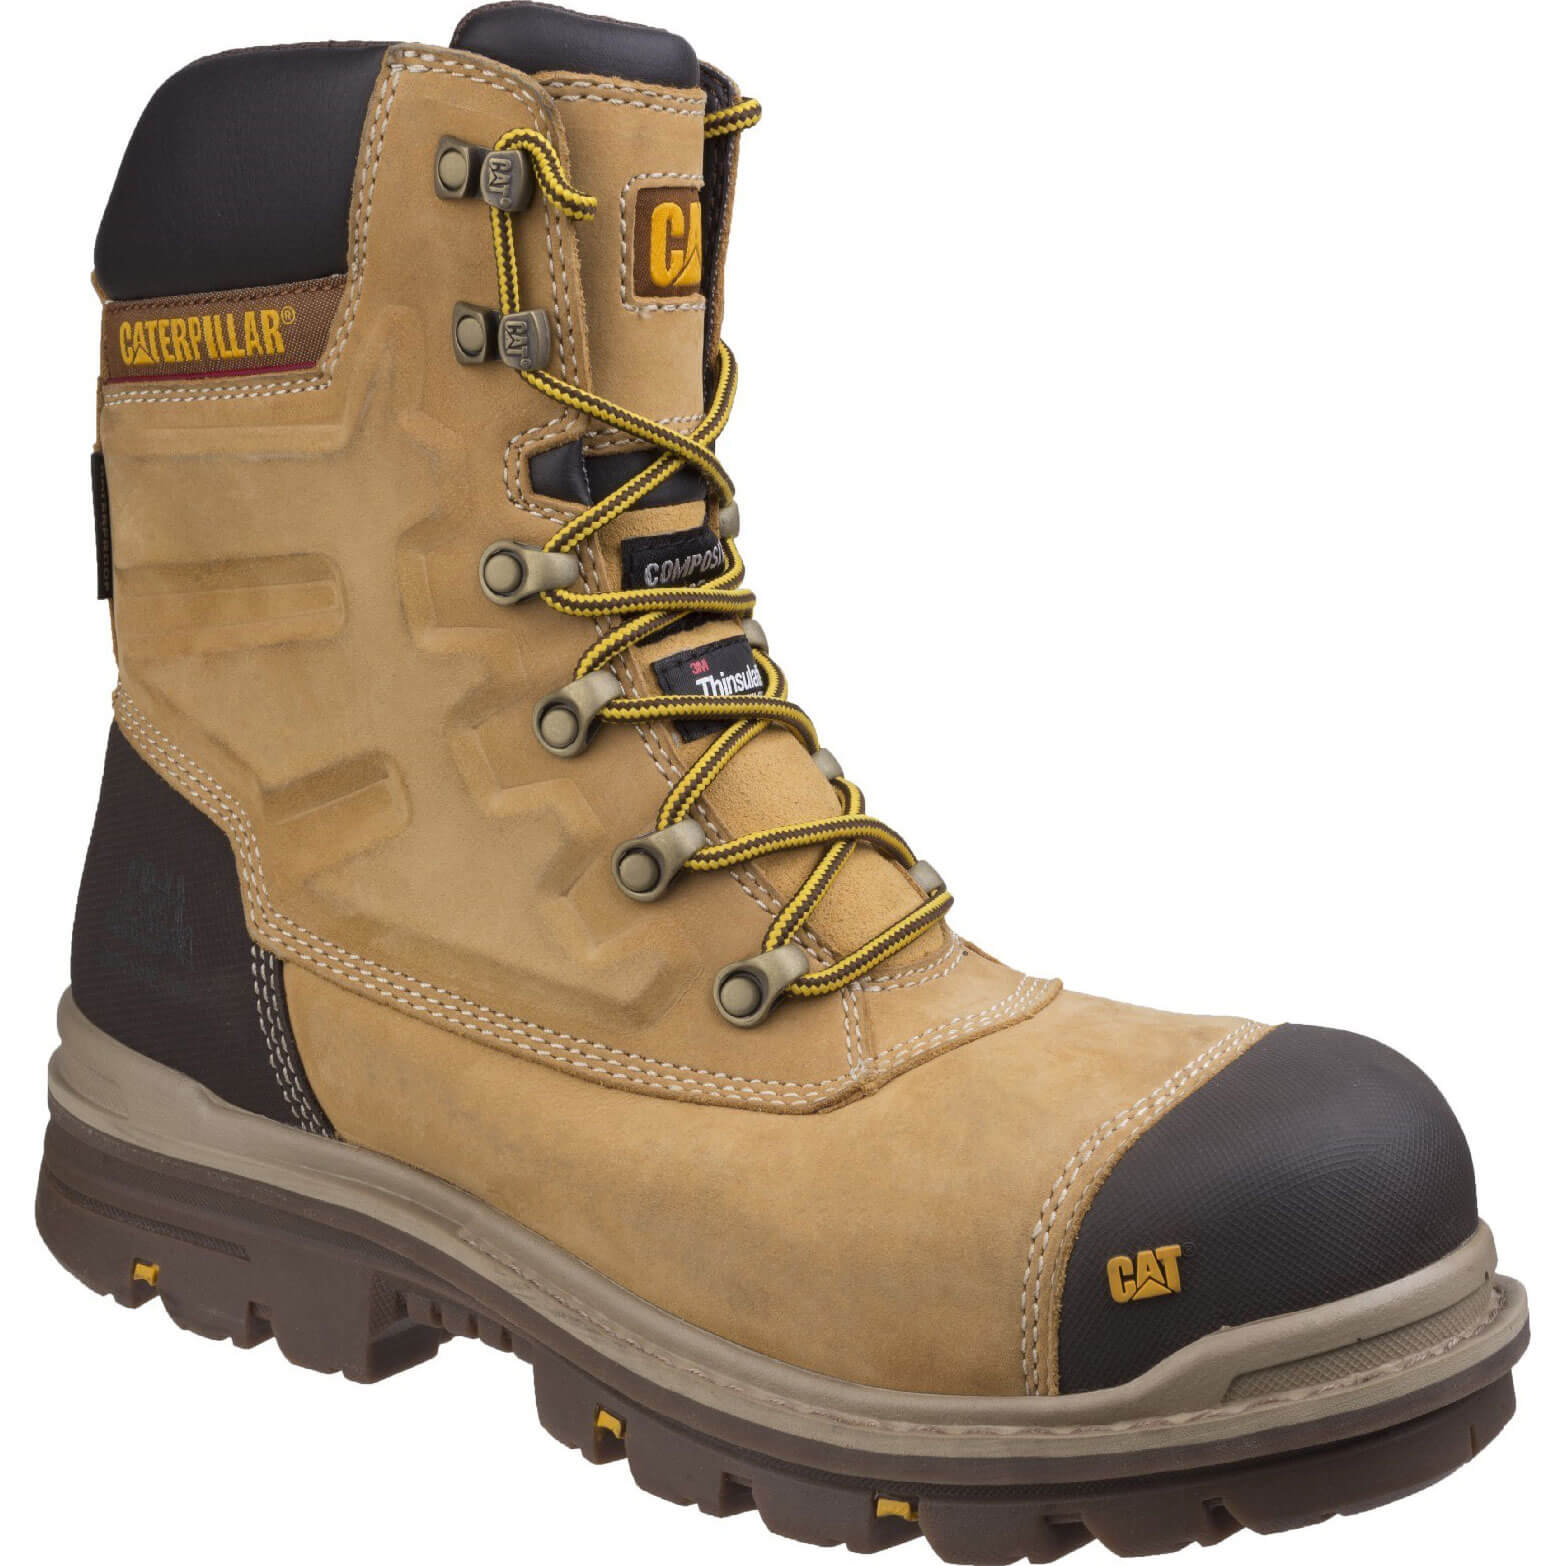 Image of Caterpillar Mens Premier Waterproof Safety Boots Honey Size 10